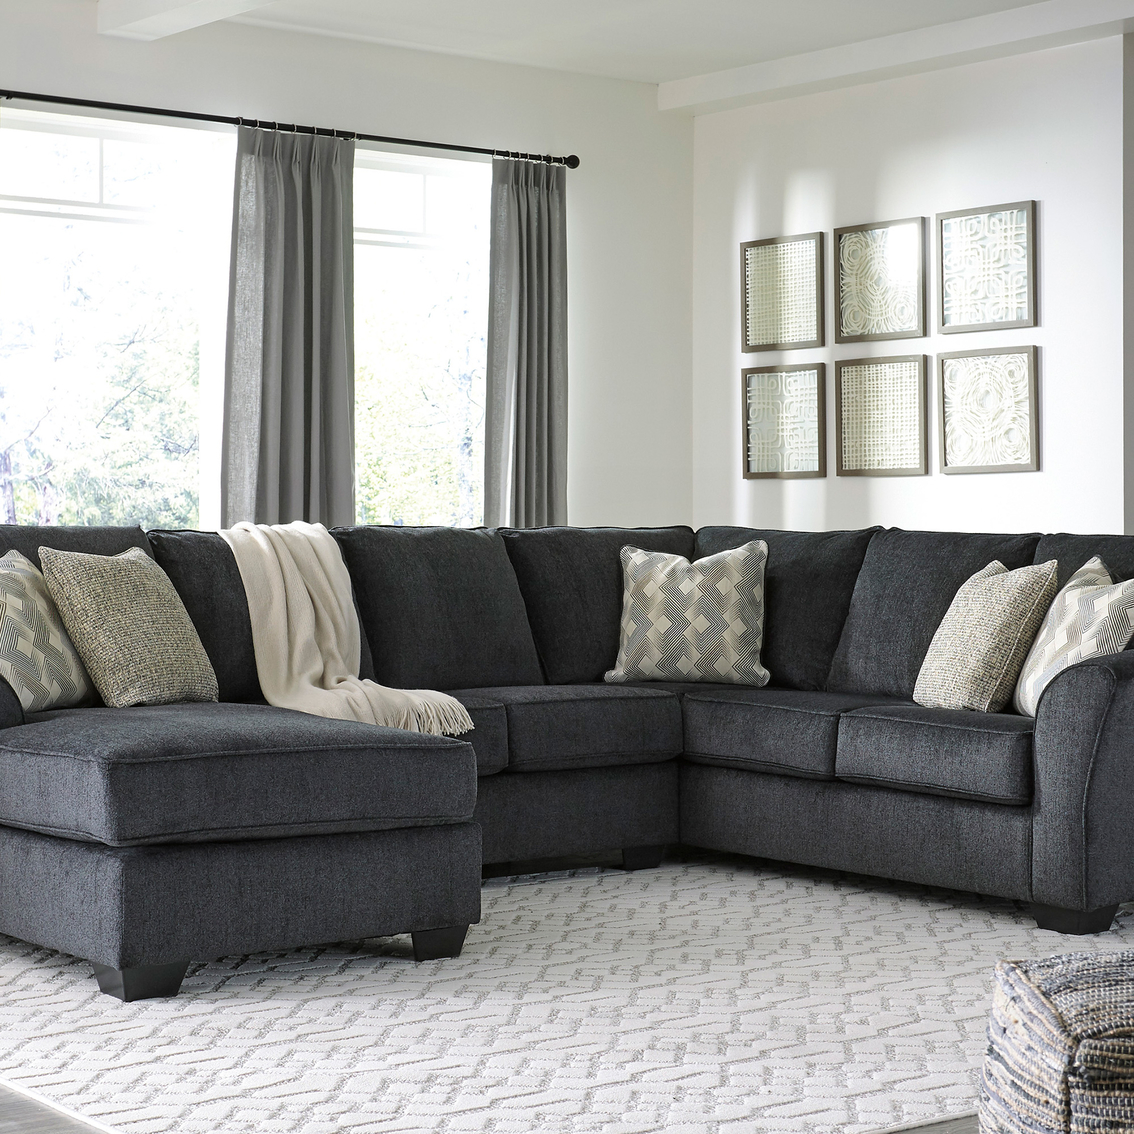 Signature Design by Ashley Eltmann 3 pc. Sectional with LAF Chaise and RAF Sofa - Image 2 of 2